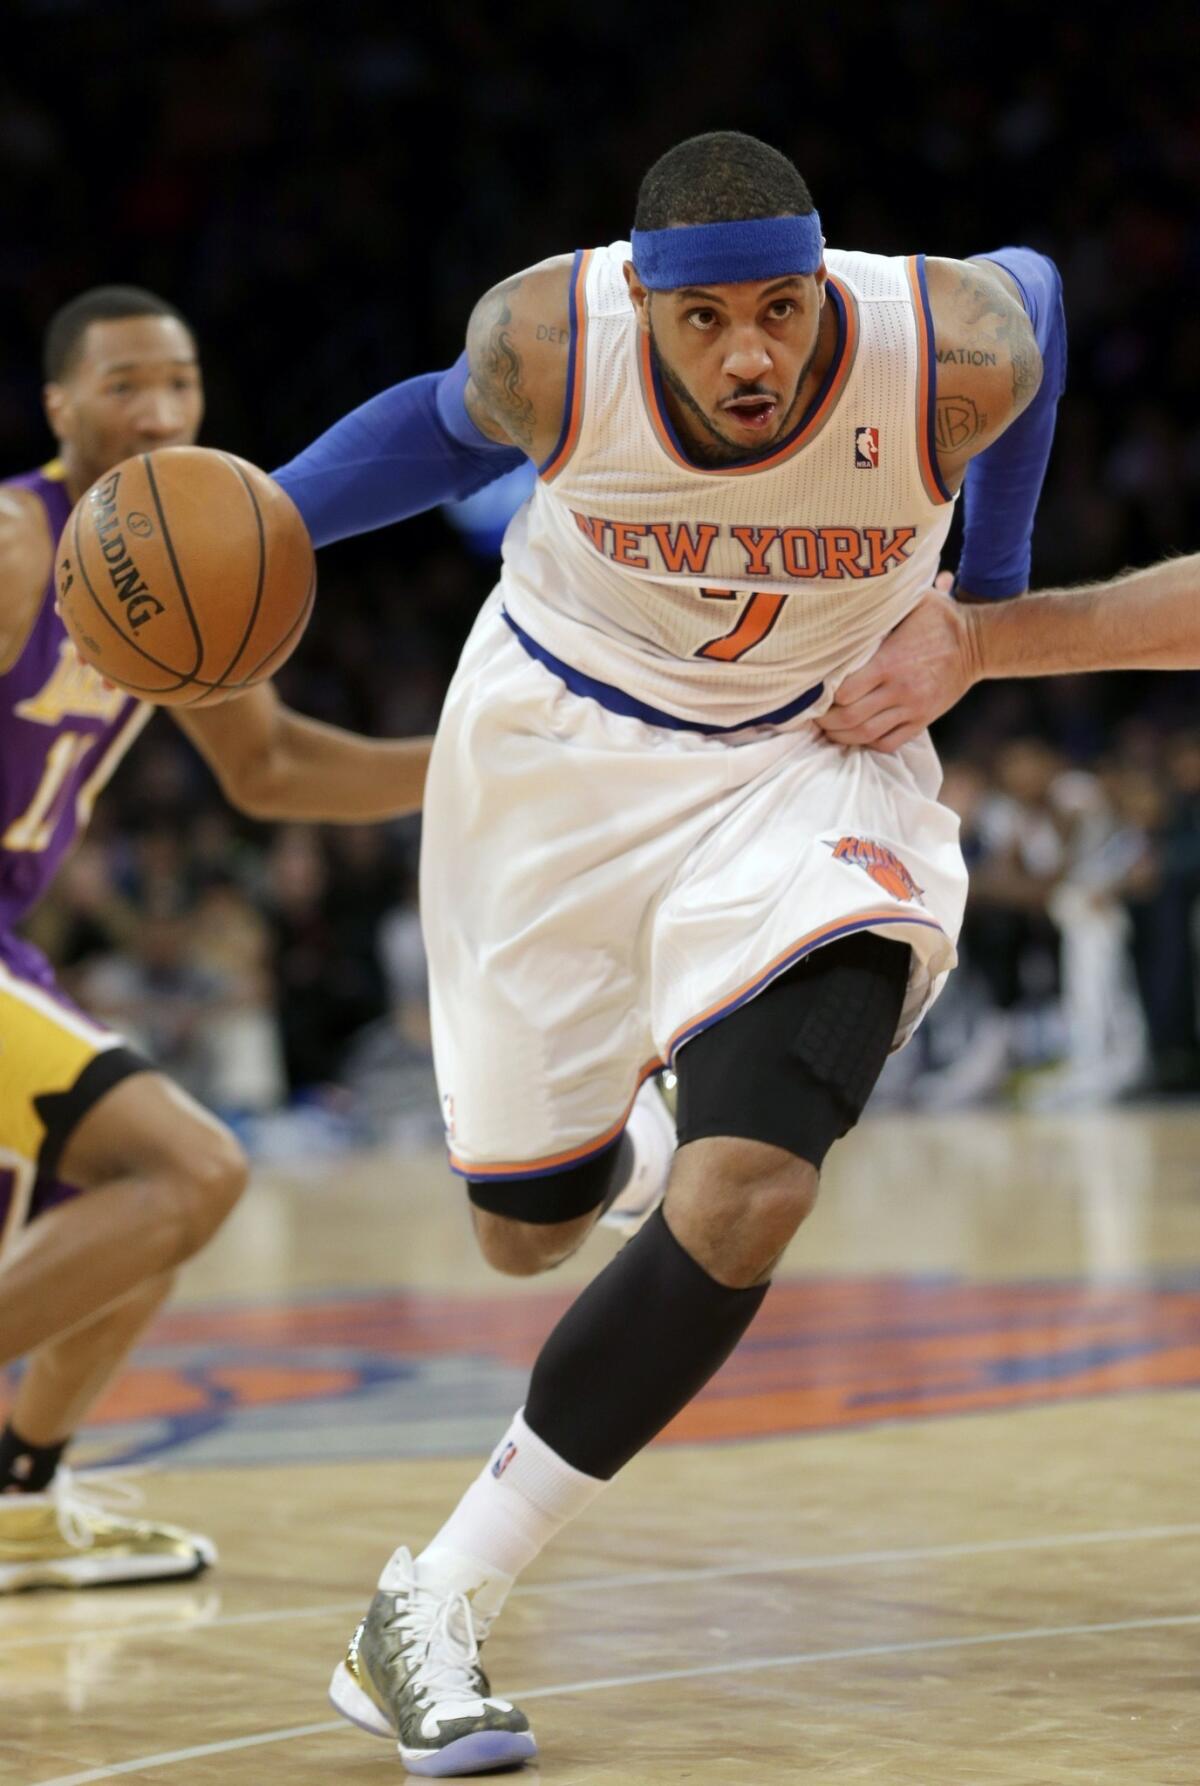 Win Or Lose, the Knicks and Lakers Are Worth Billions - The New